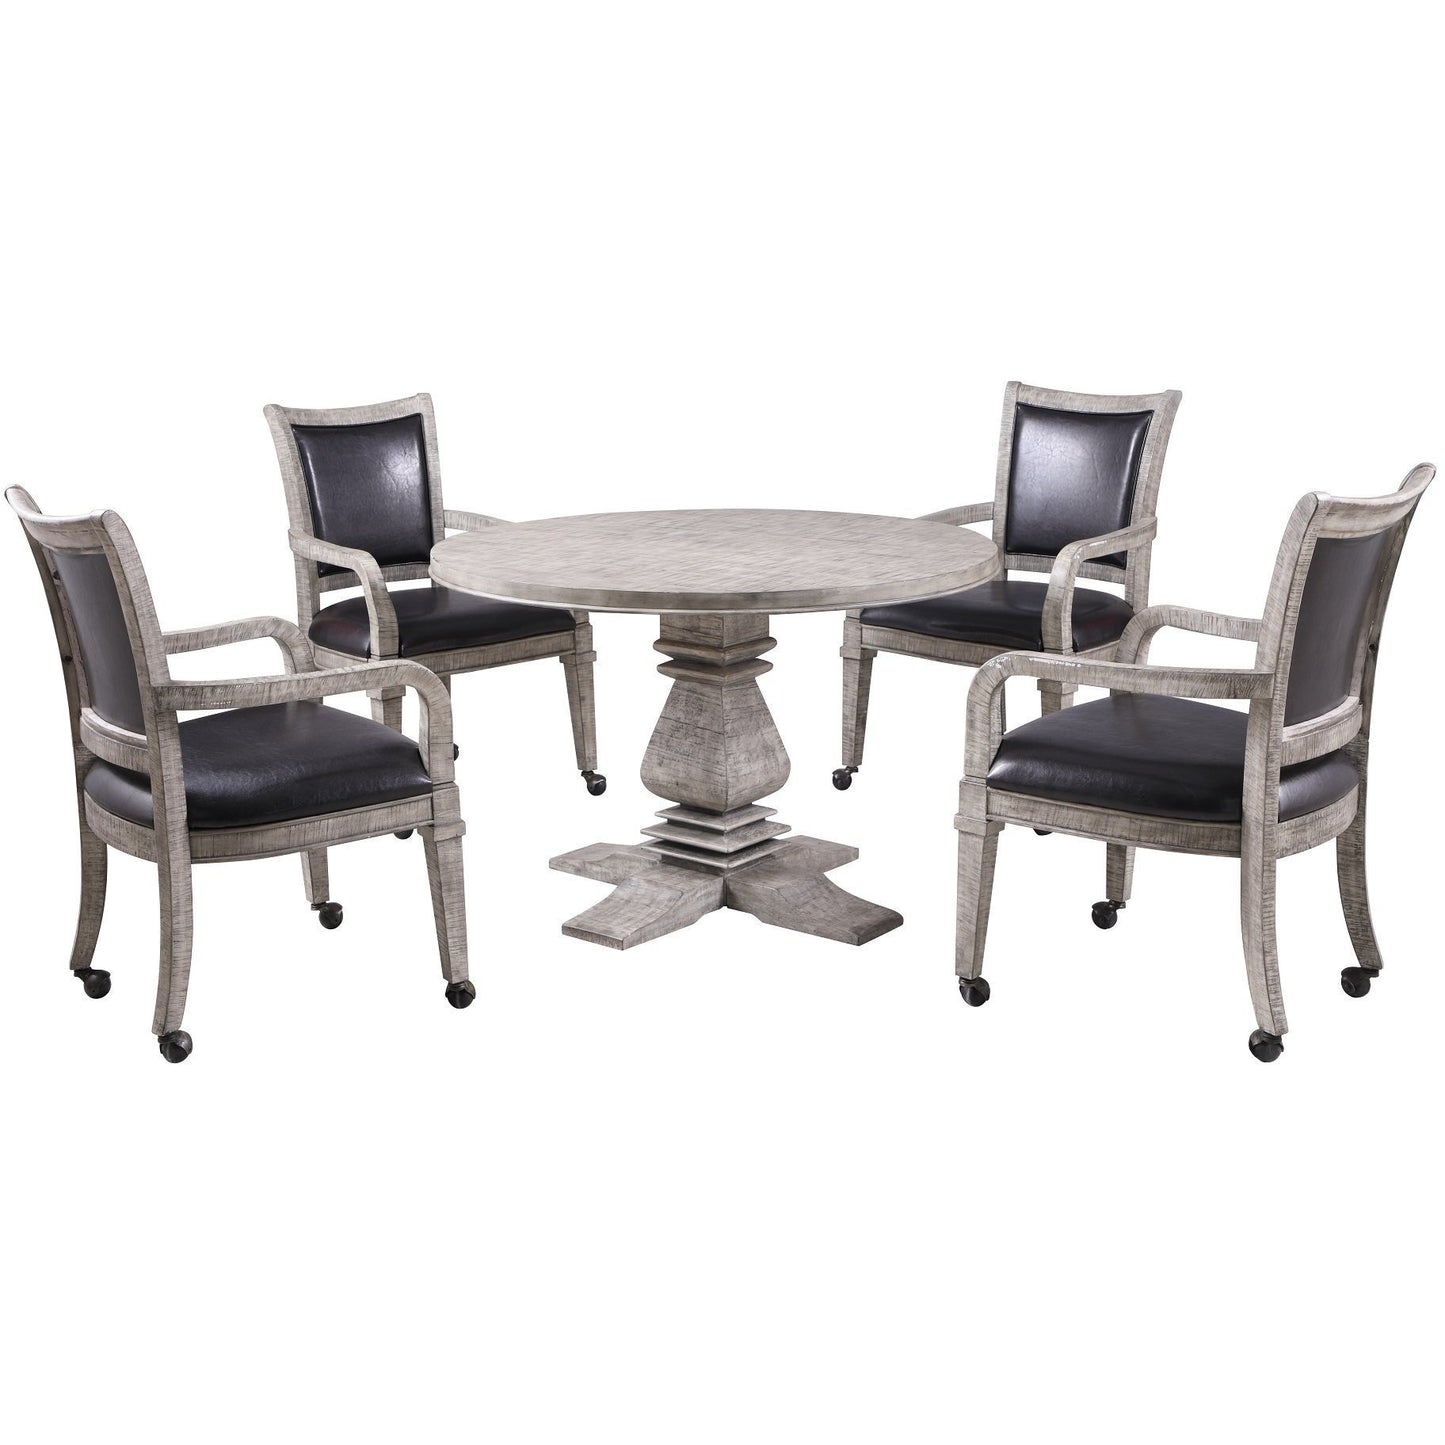 Hathaway Montecito Driftwood 48" Poker Dining Table with 4 Arm Chairs - Just Poker Tables